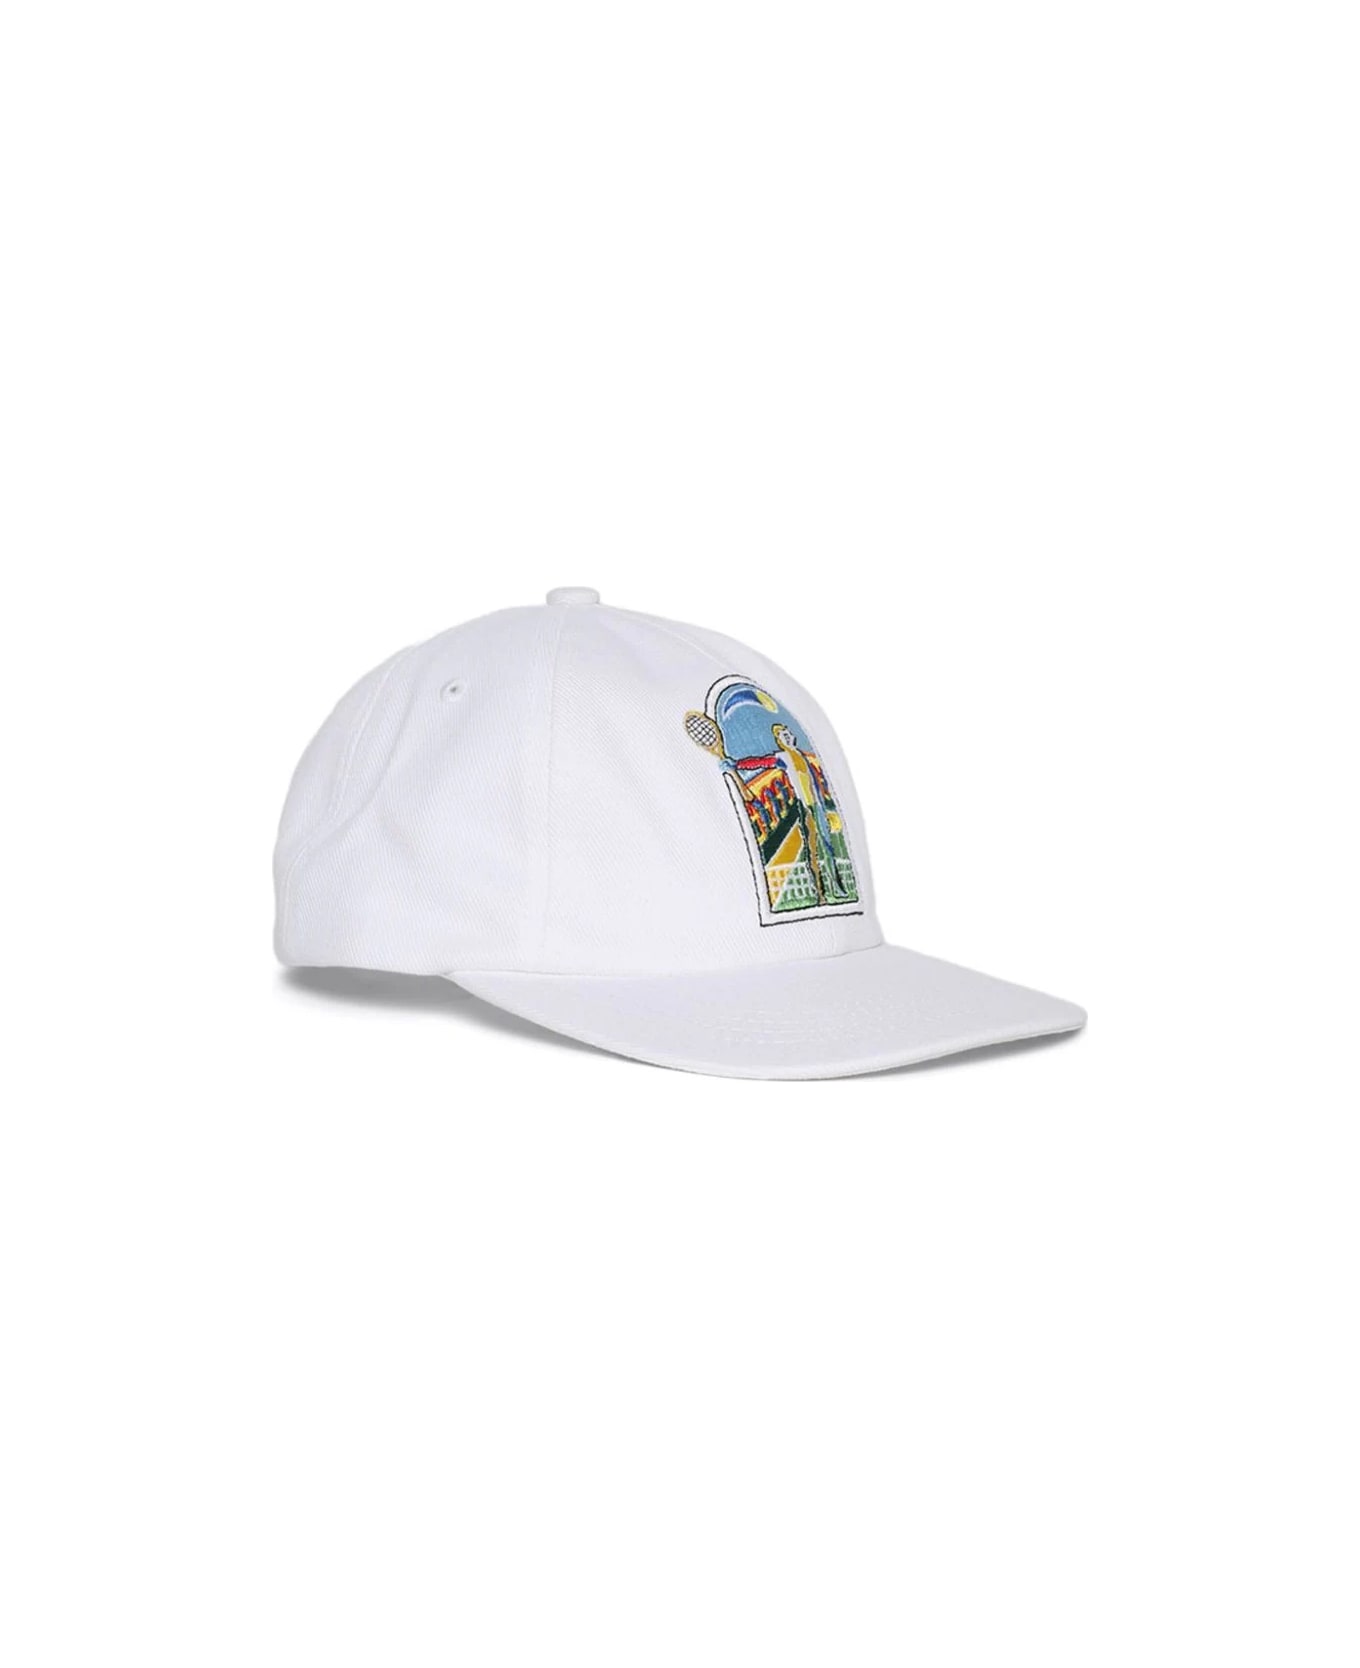 Casablanca White Baseball Hat With Front Embroidery - White